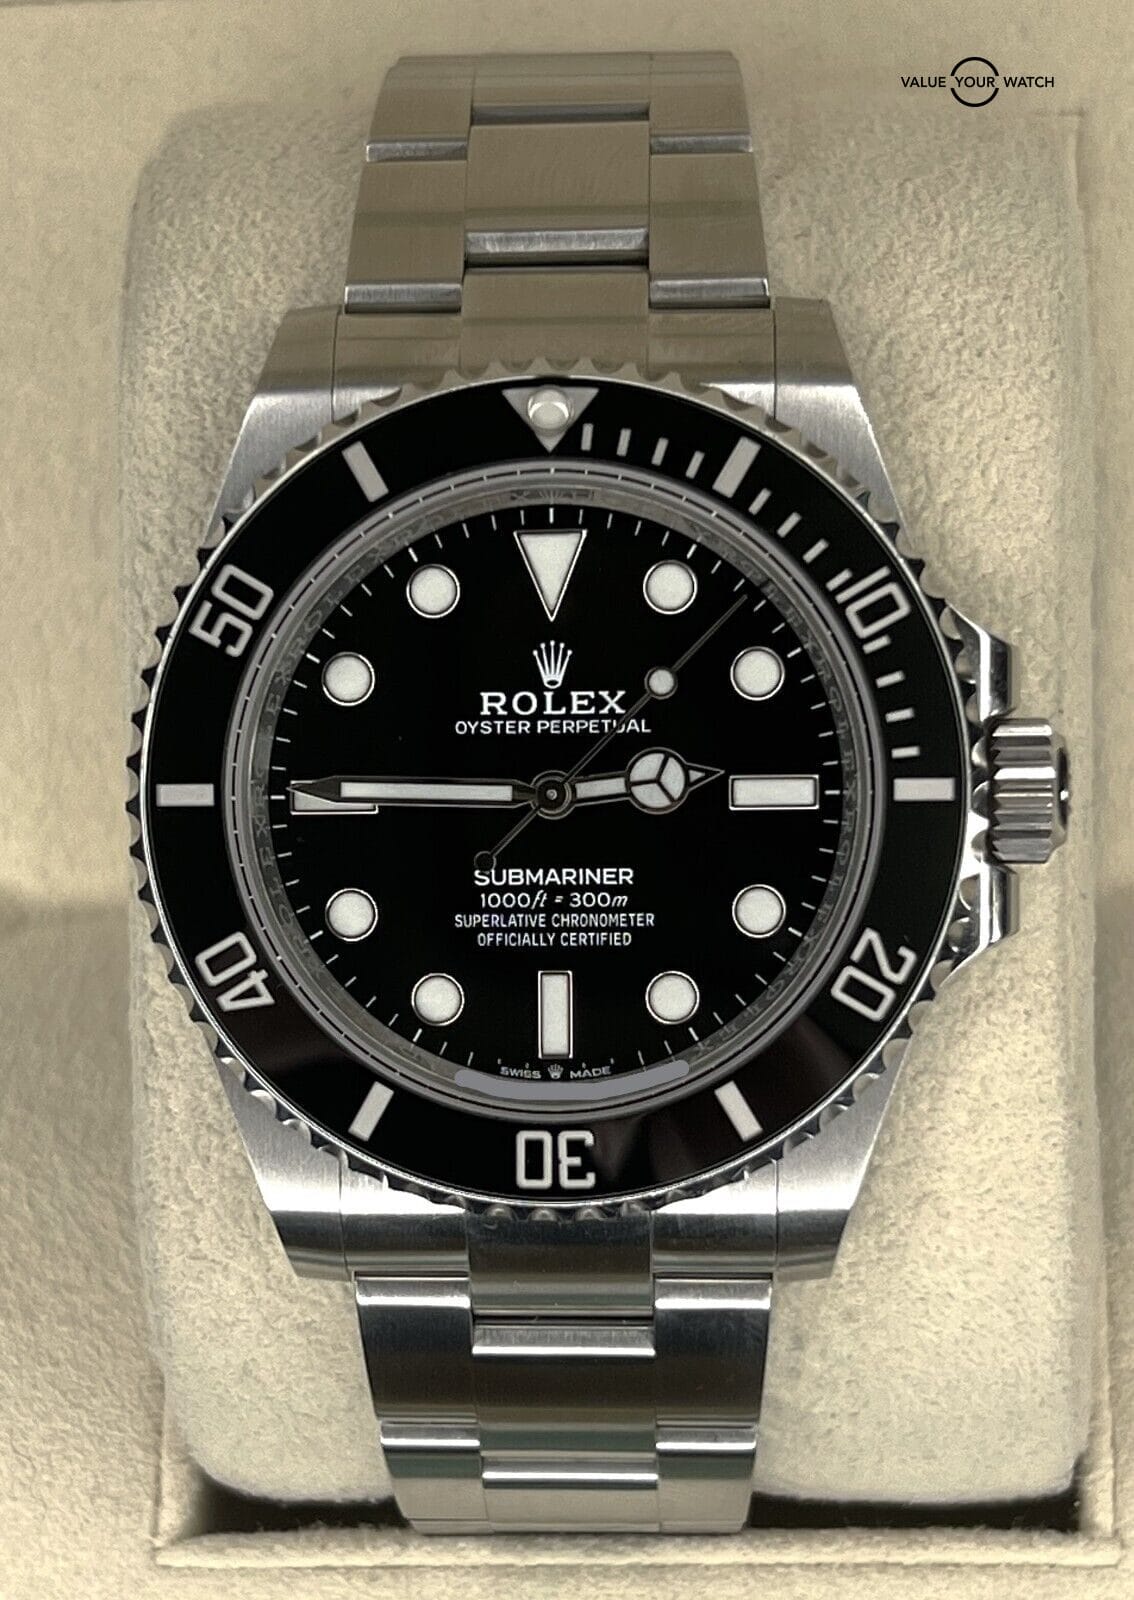 Rolex Submariner Date 124060 Black Dial 2020 BOXES/PAPERS! Value Your Watch